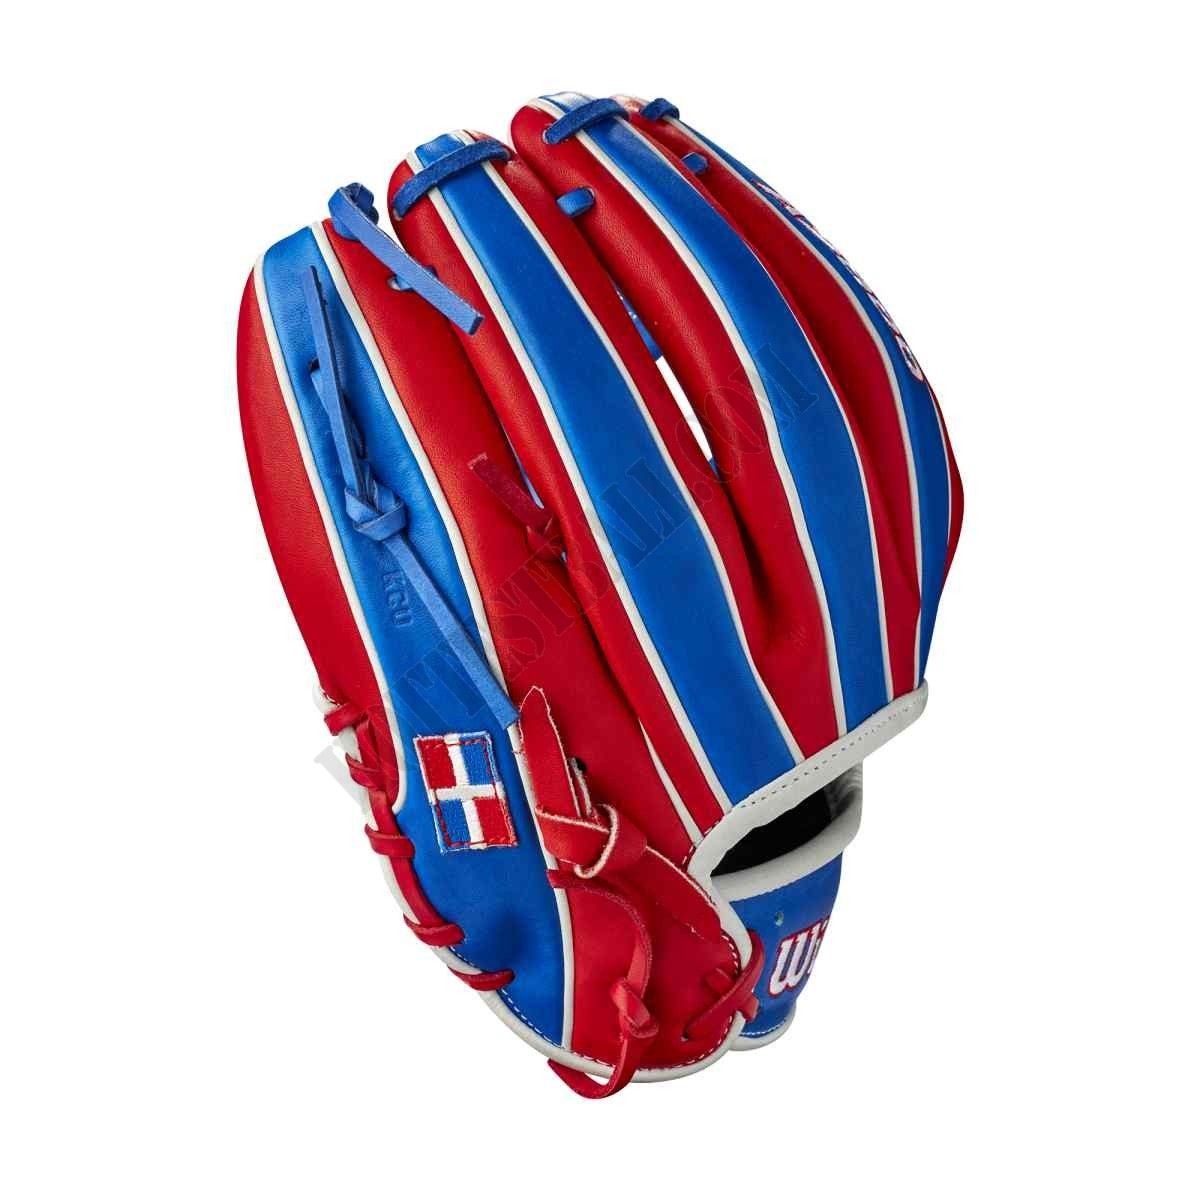 2021 A2000 1786 Dominican Republic 11.5" Infield Baseball Glove - Limited Edition ● Wilson Promotions - -4